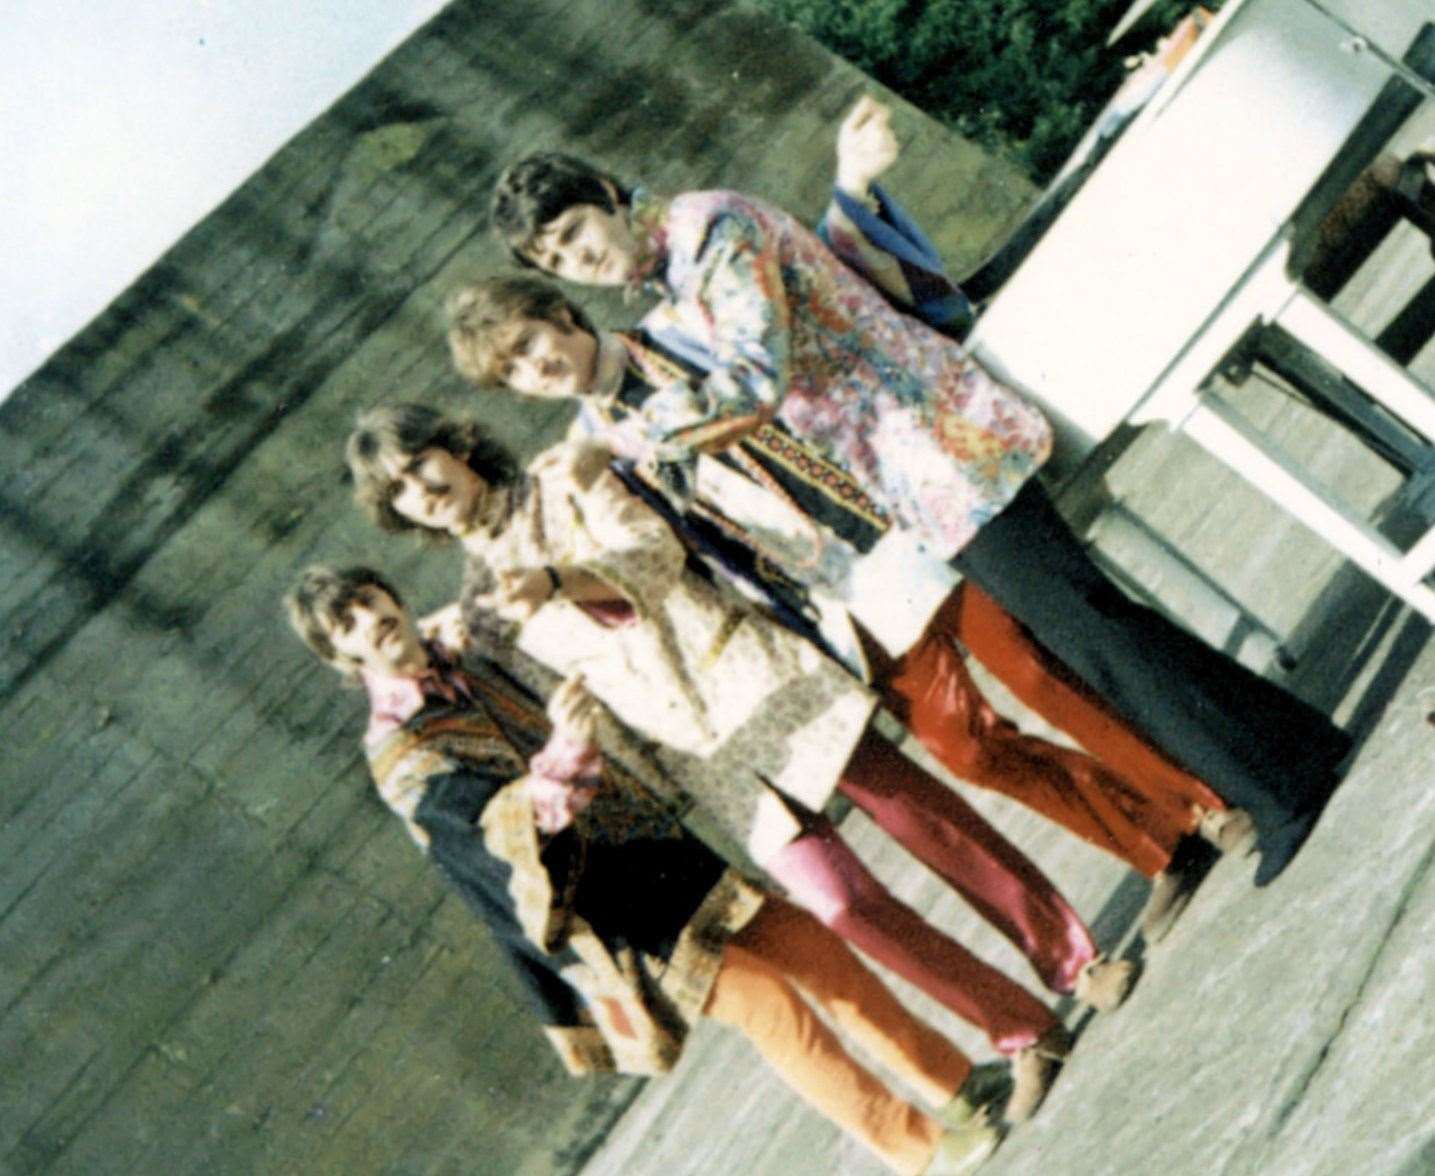 The Beatles at West Malling in 1967. Submitted by Jason Cornthwaite